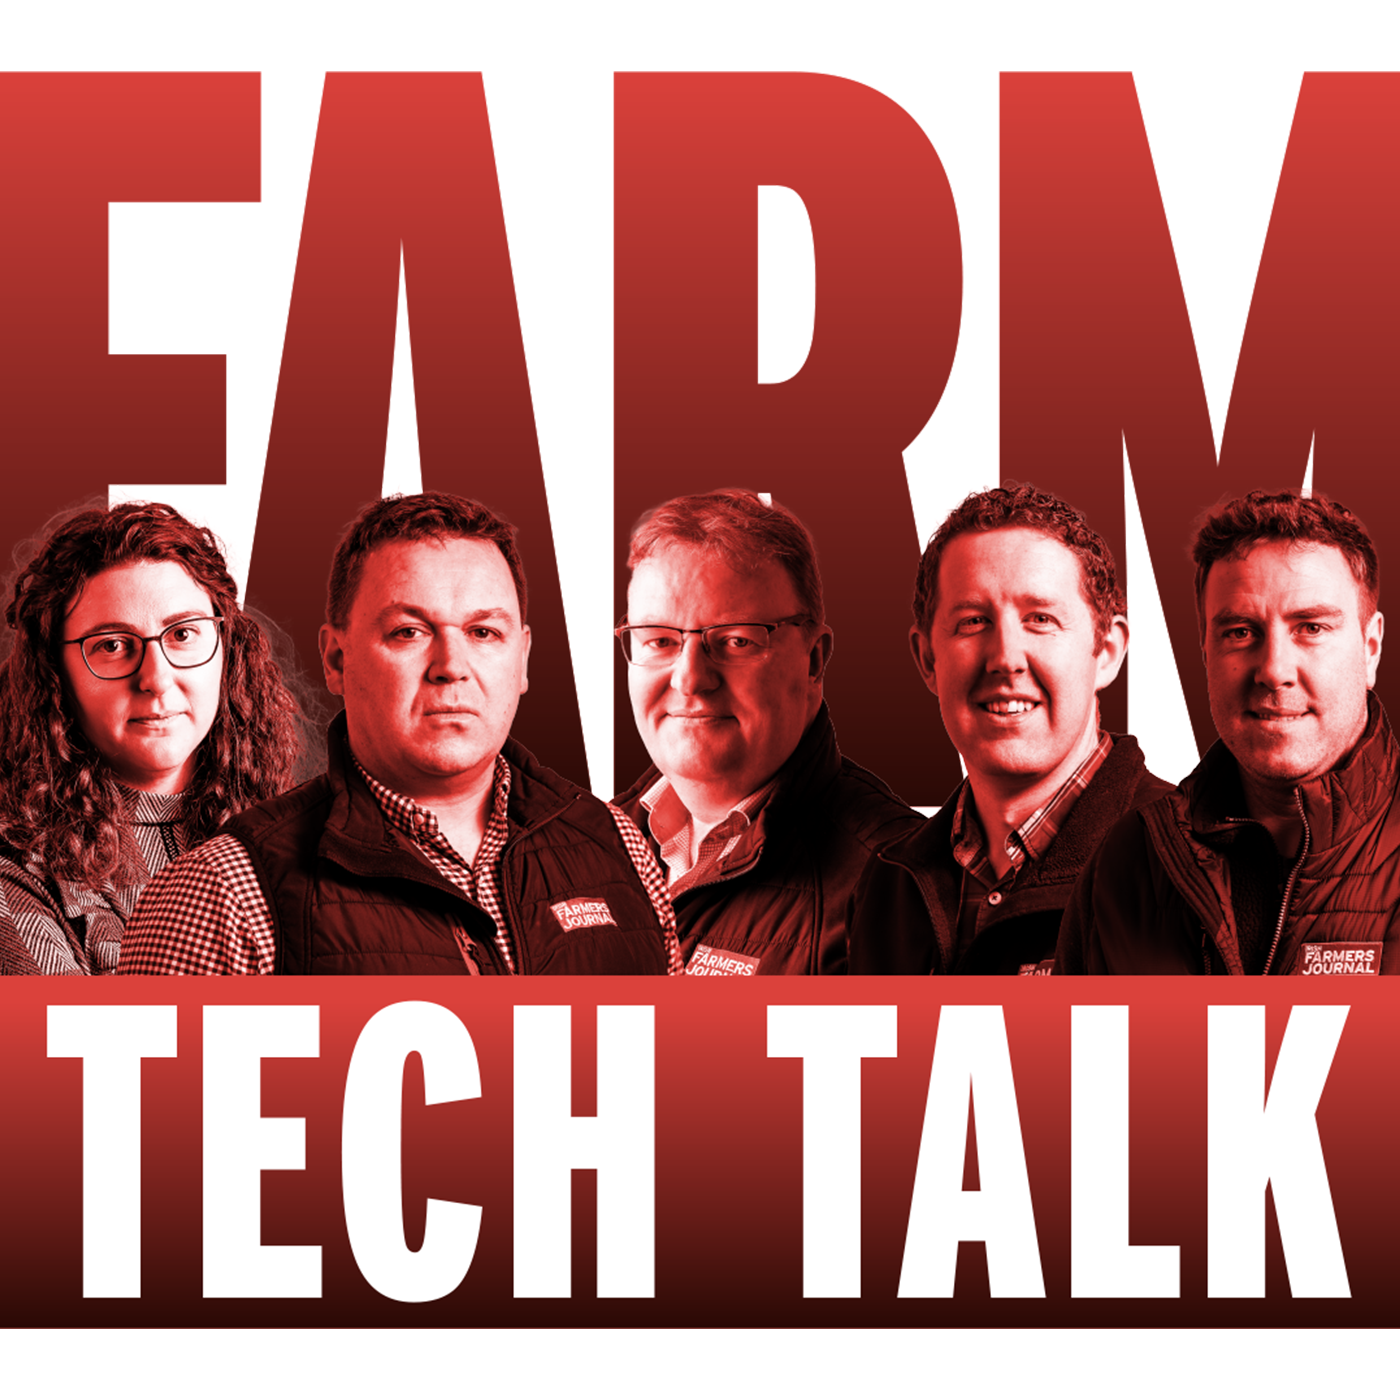 Ep 1011: Farm Tech Talk Ep 214 - Beef price slide, BISS details, nitrates across Europe and farm safety.